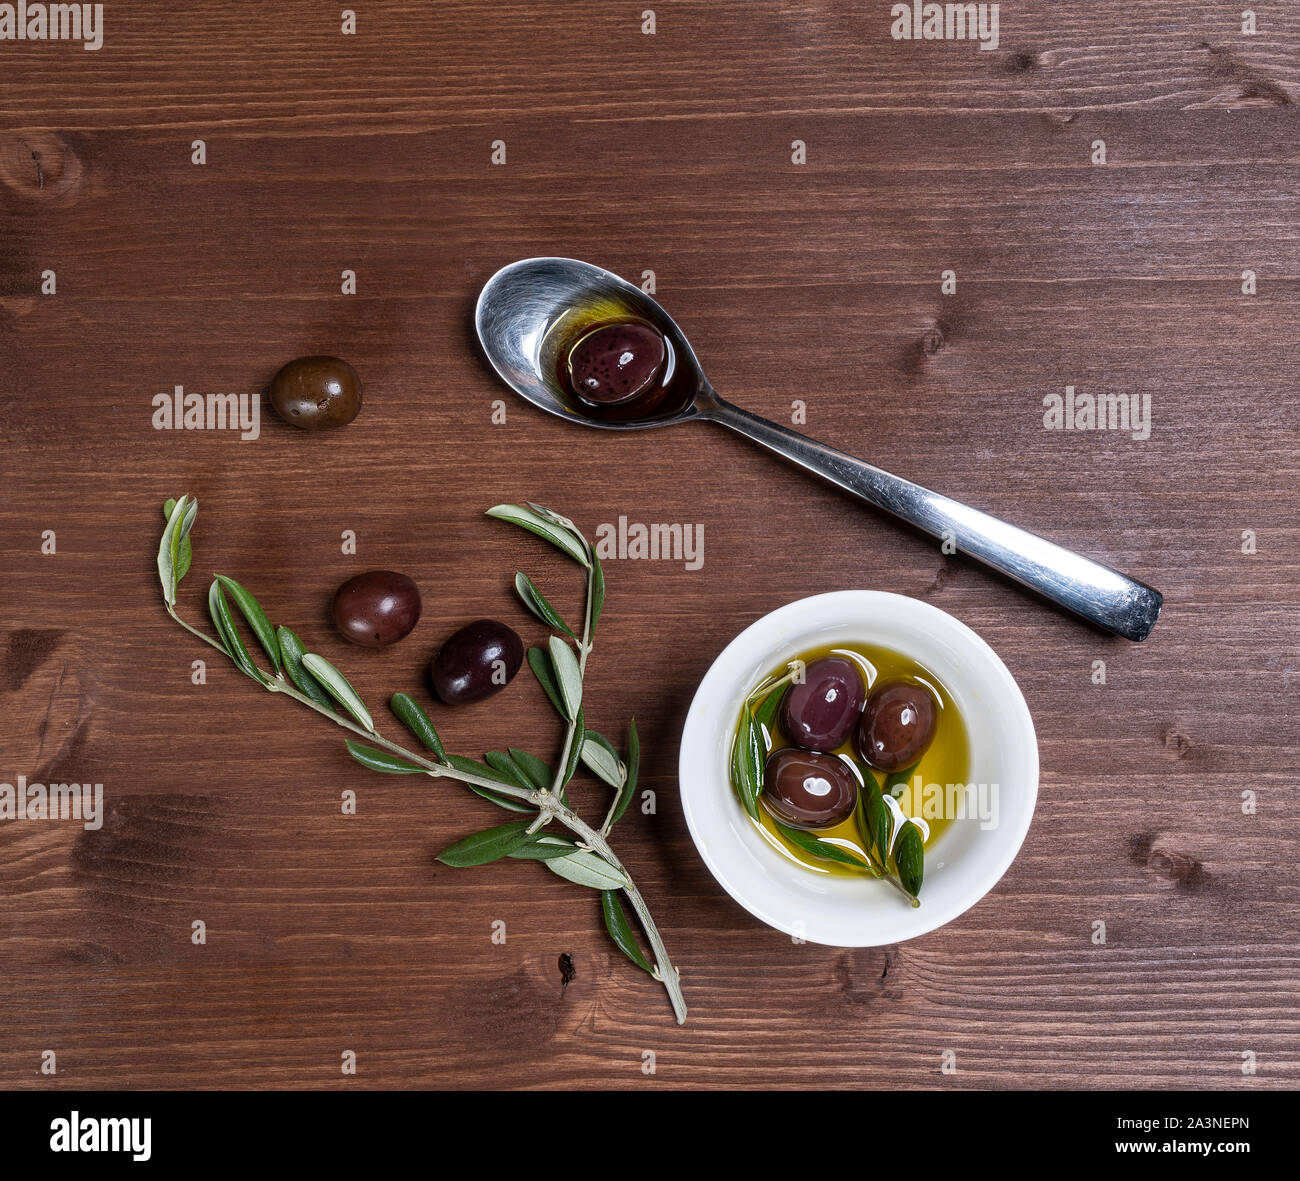 Olive oil and olives on a wooden surface with some Olive branches Stock Photo